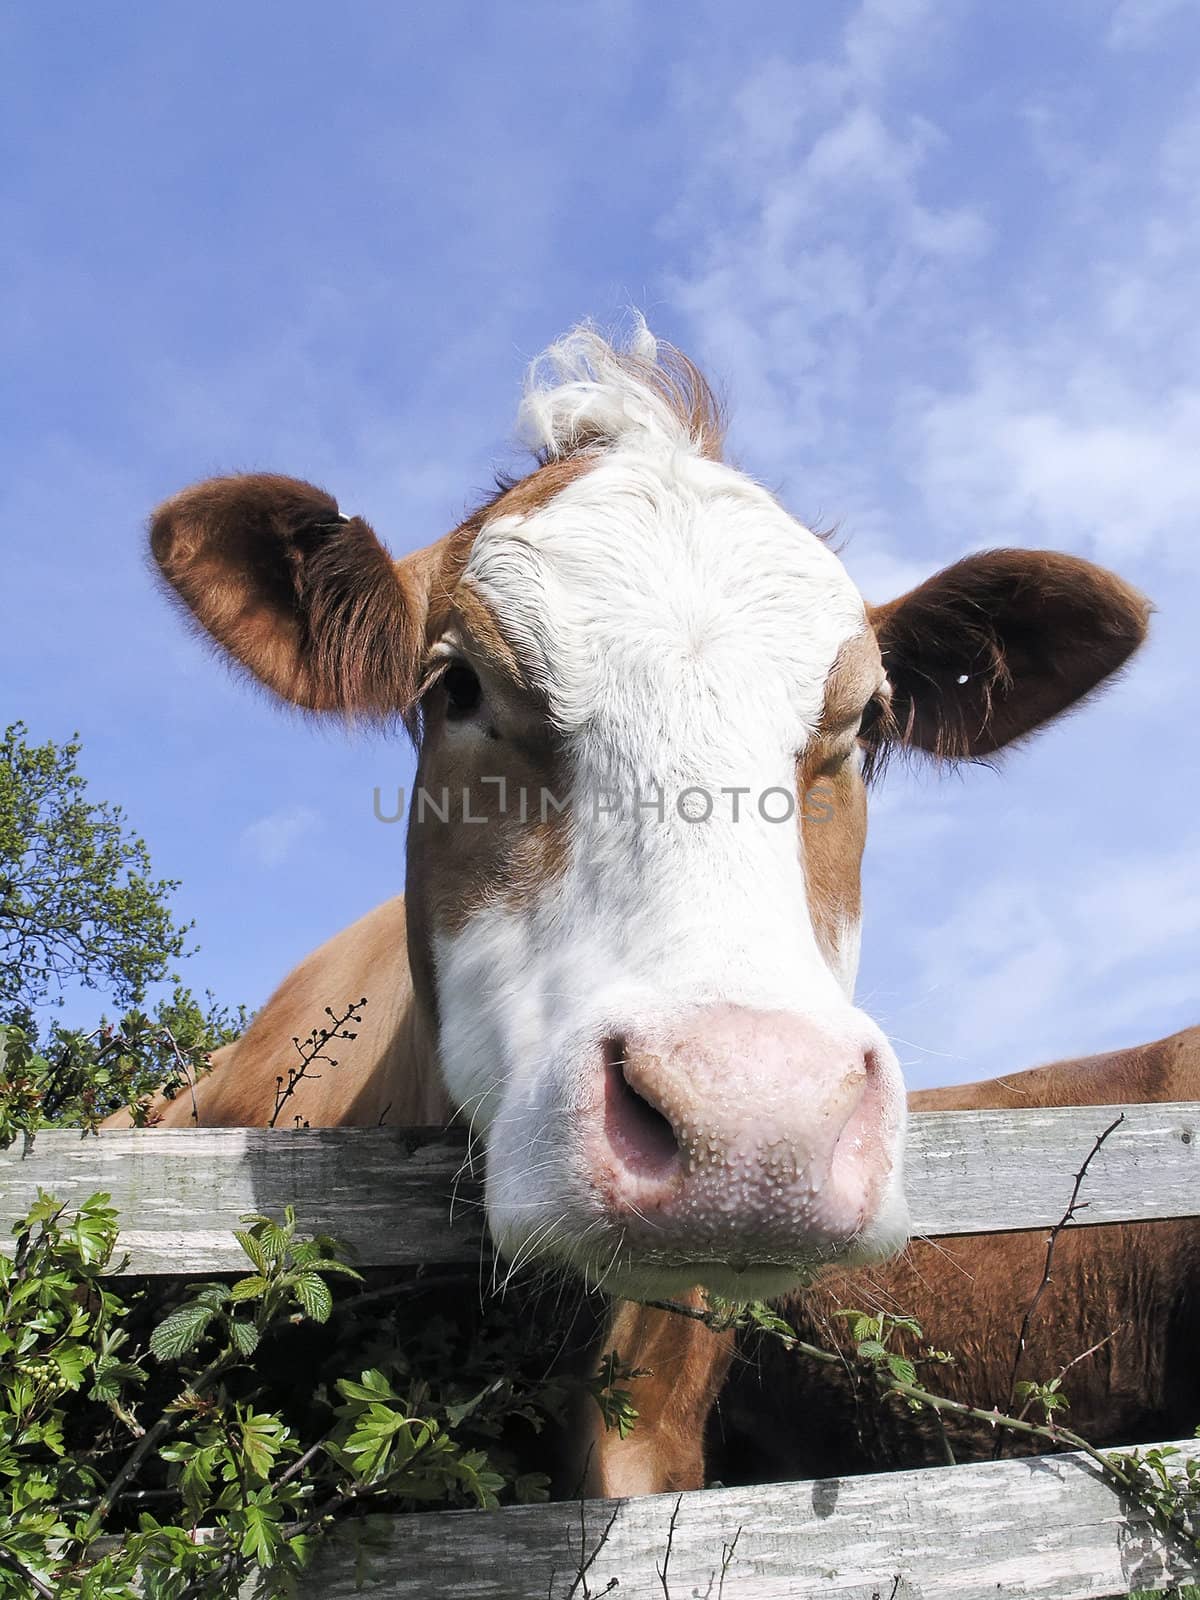 Close up of dairy cow looking over wooden fence